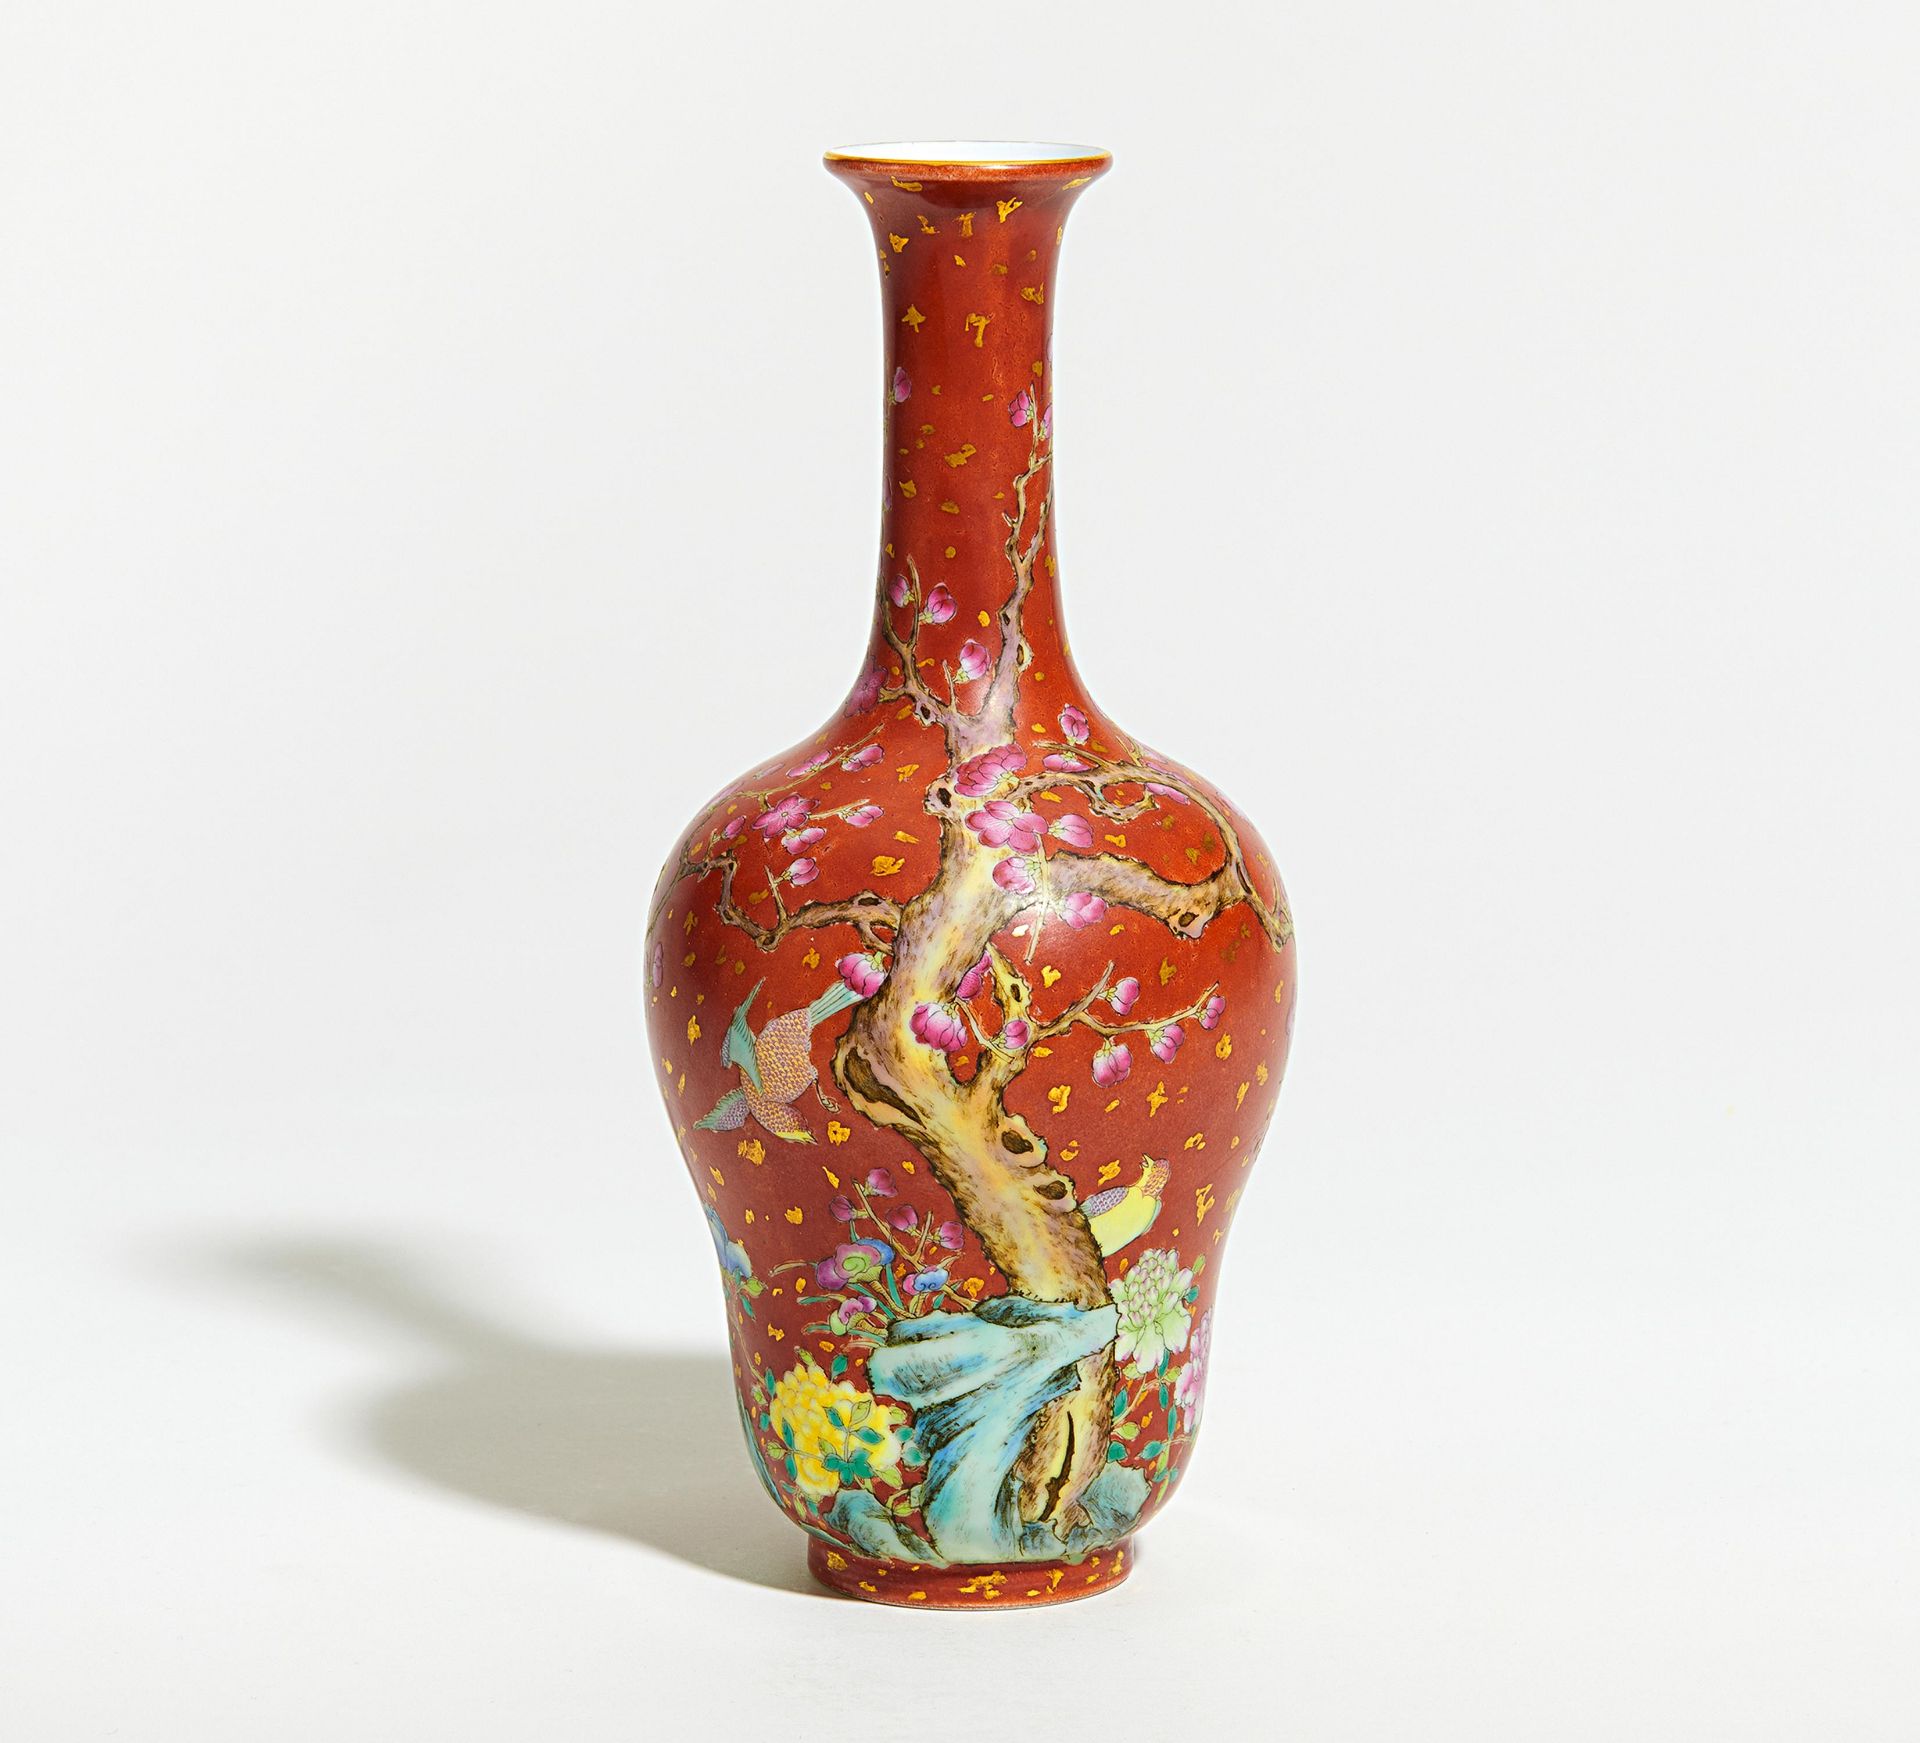 LONG-NECKED VASE WITH FLOWERING PLUM TREE AND SONGBIRDS. Origin: China. Technique: Porcelain painted